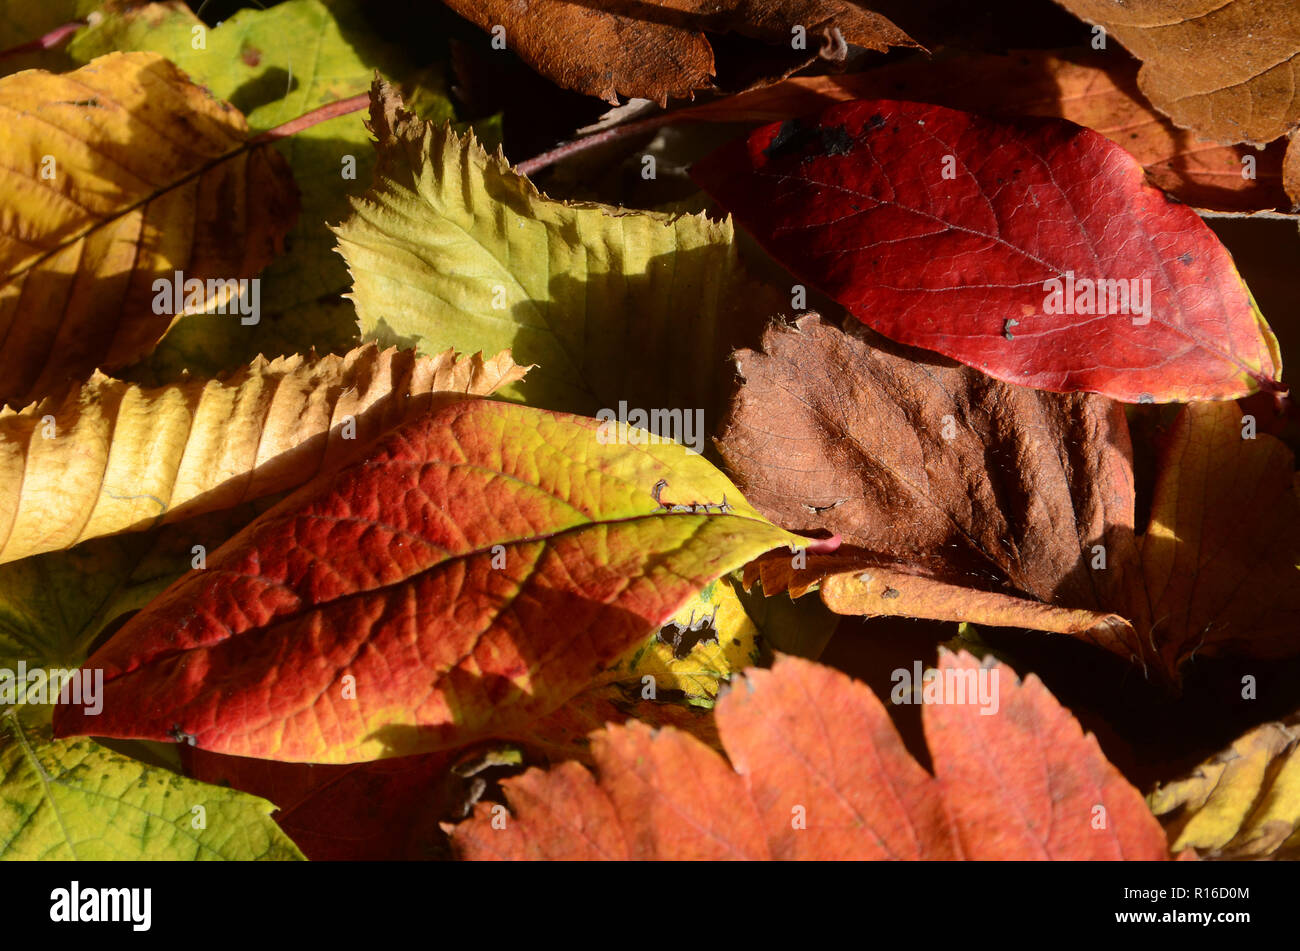 Leaves of different trees in warm autumn colors. Stock Photo